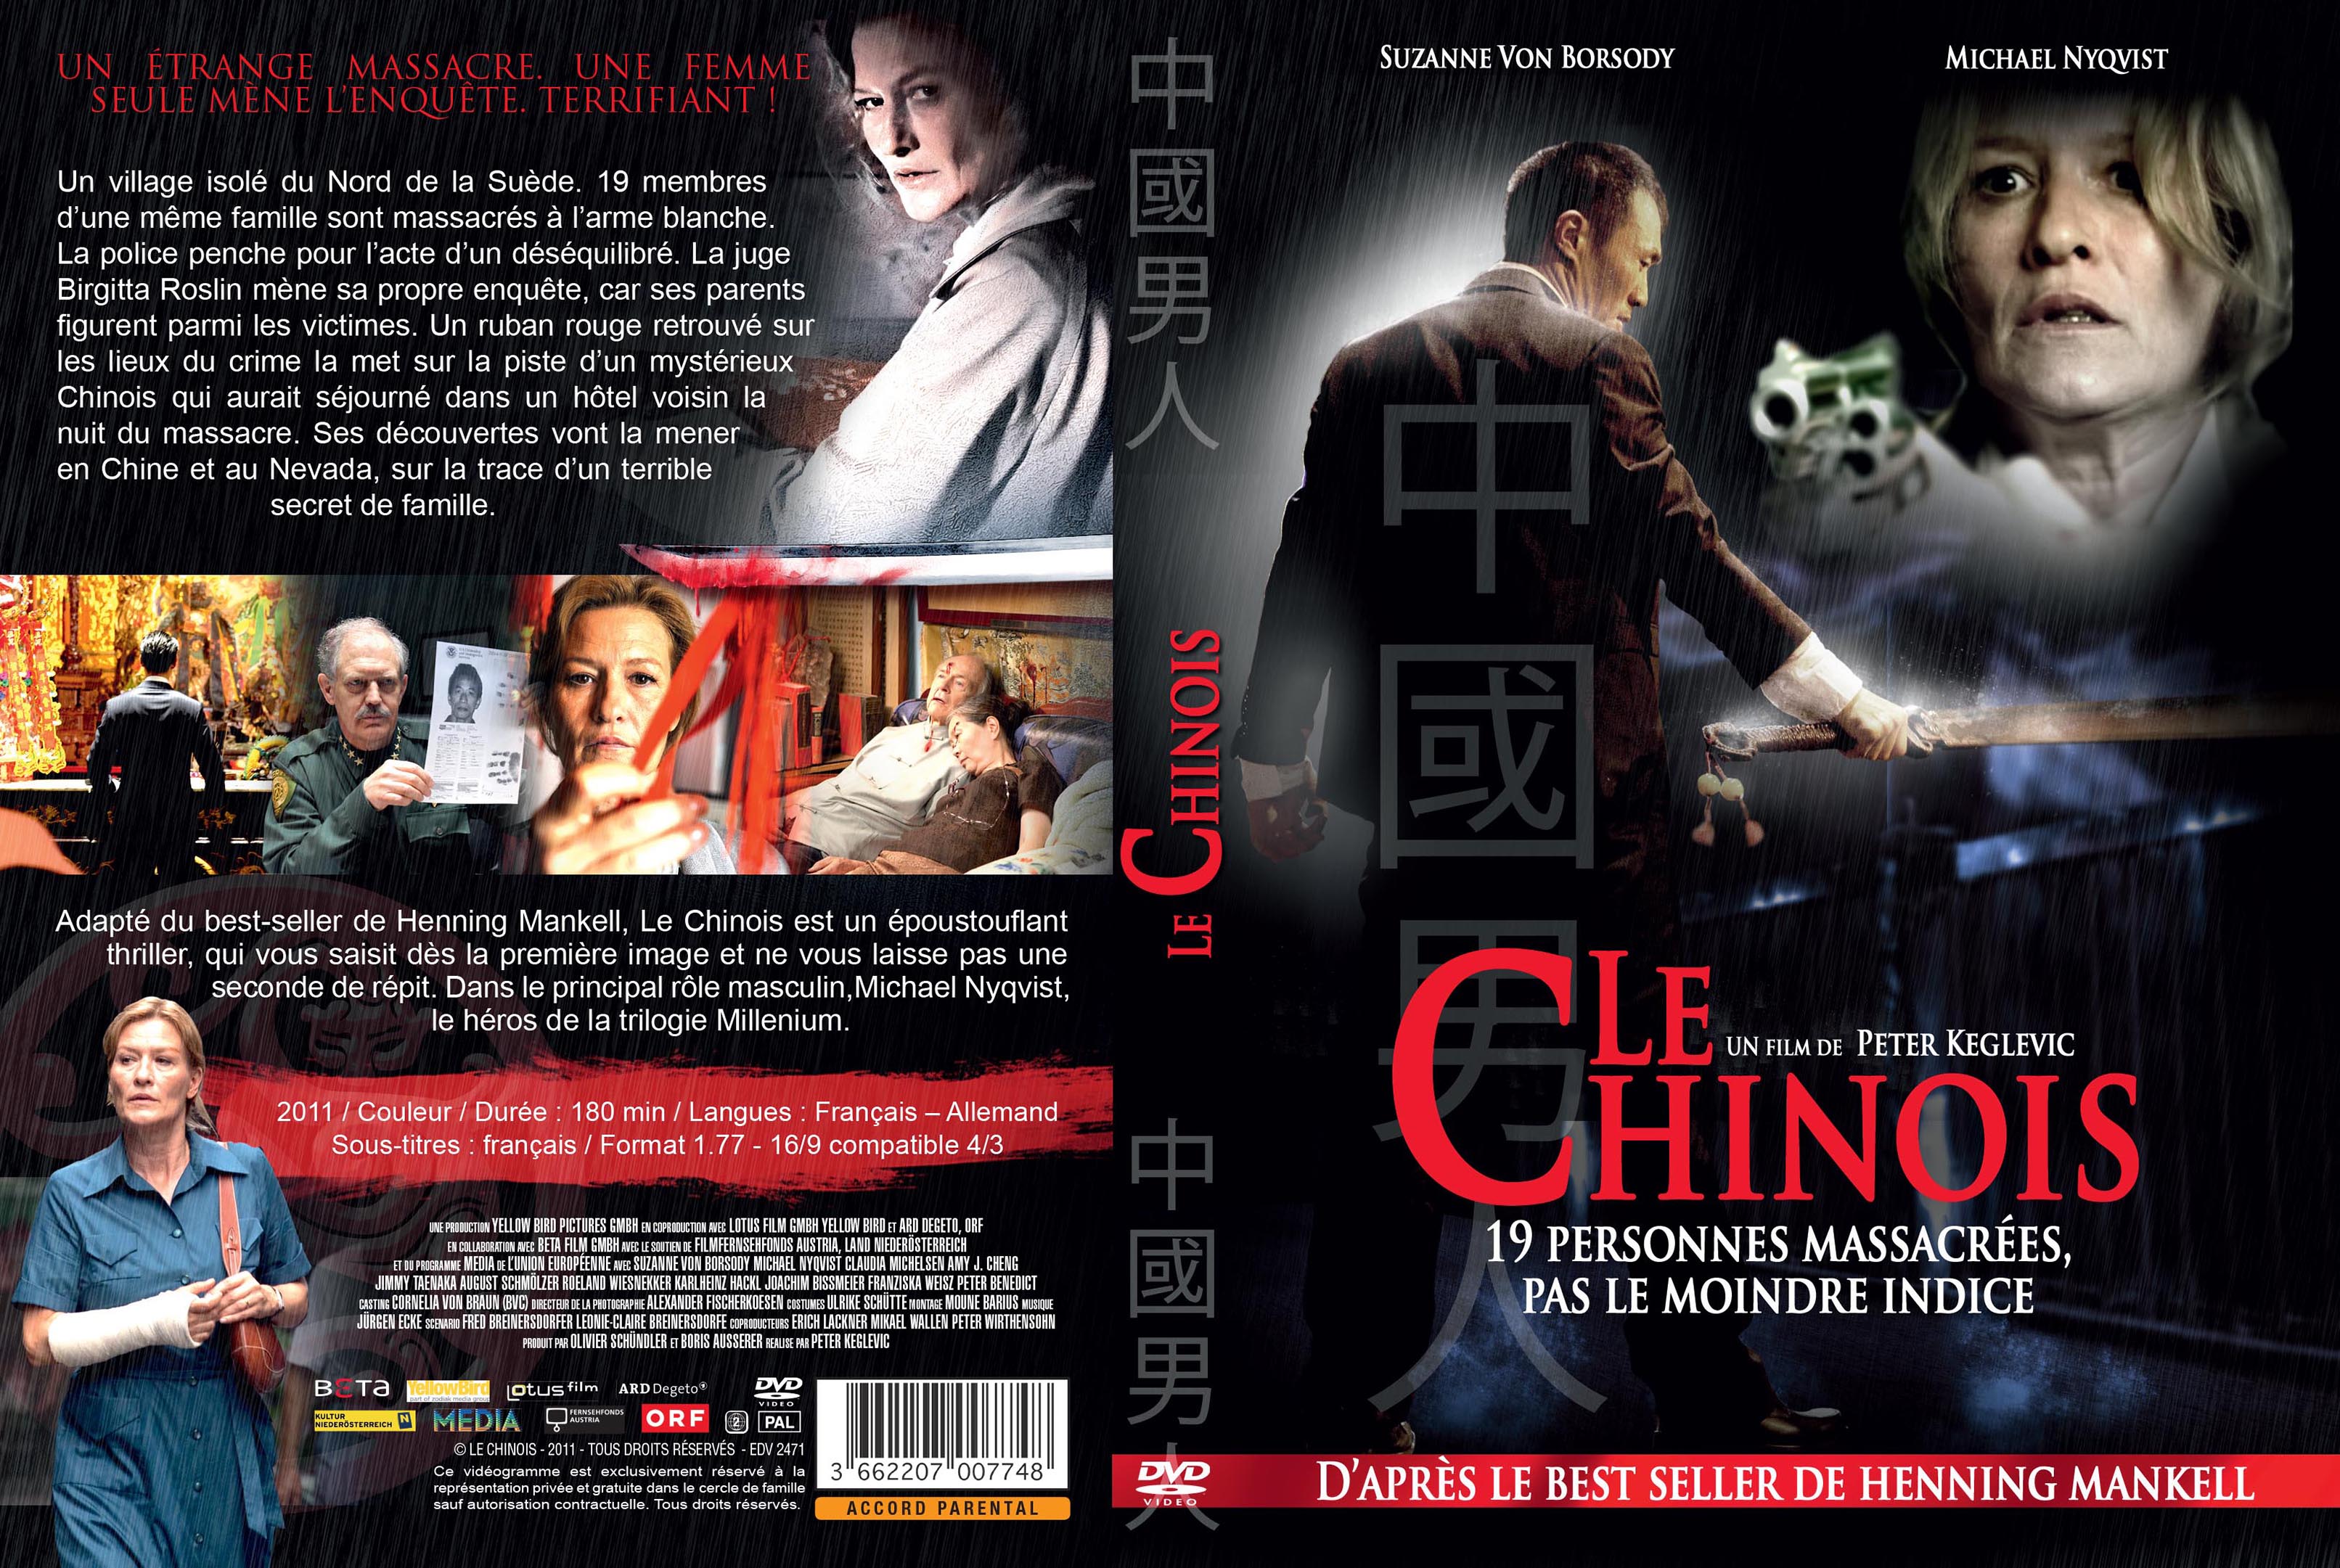 Jaquette DVD Le chinois